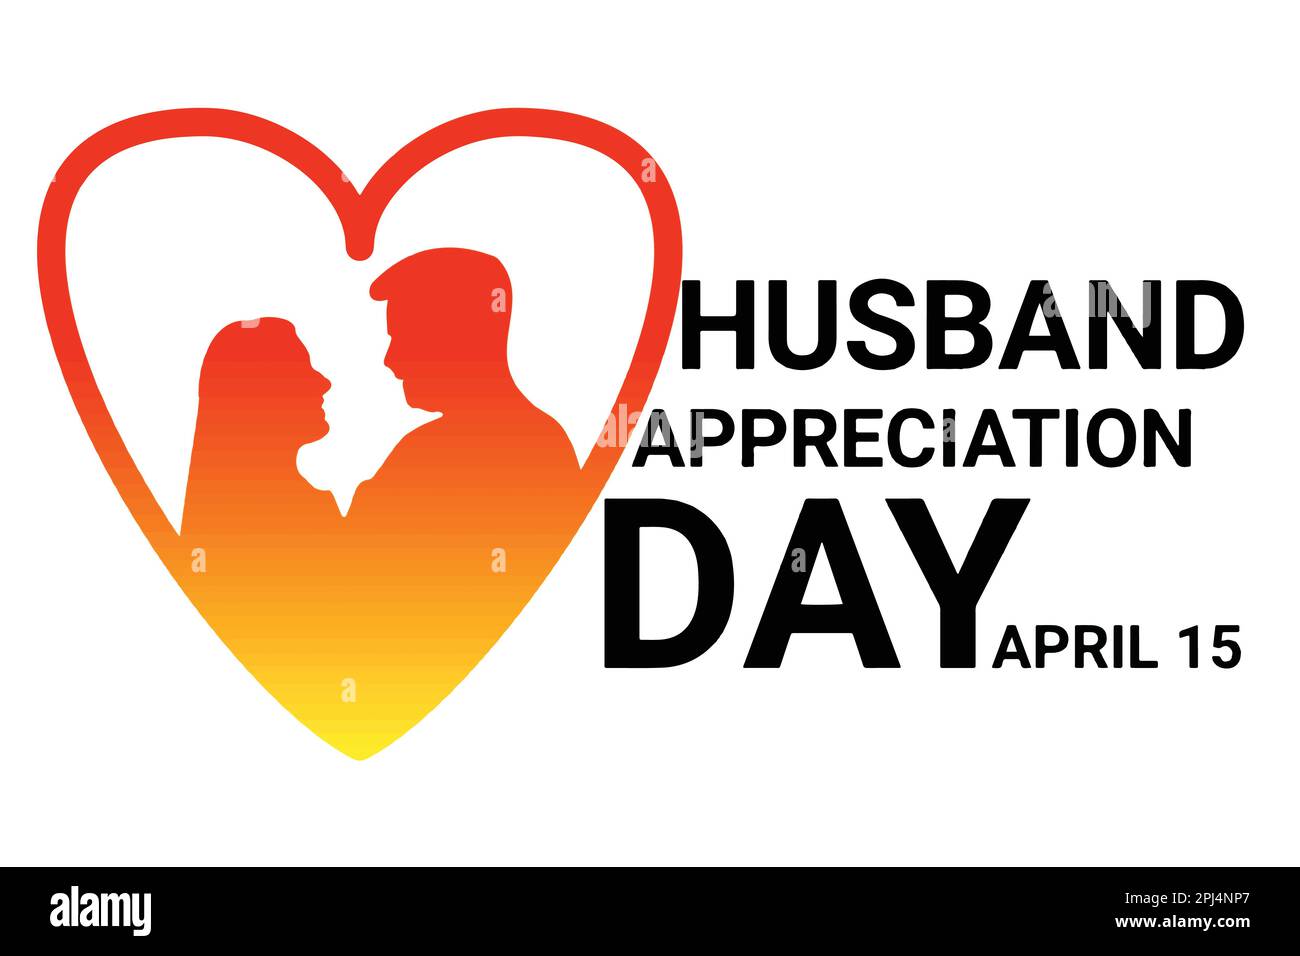 Husband and wife in the heart of the world. The concept of Husband Appreciation Day Stock Vector